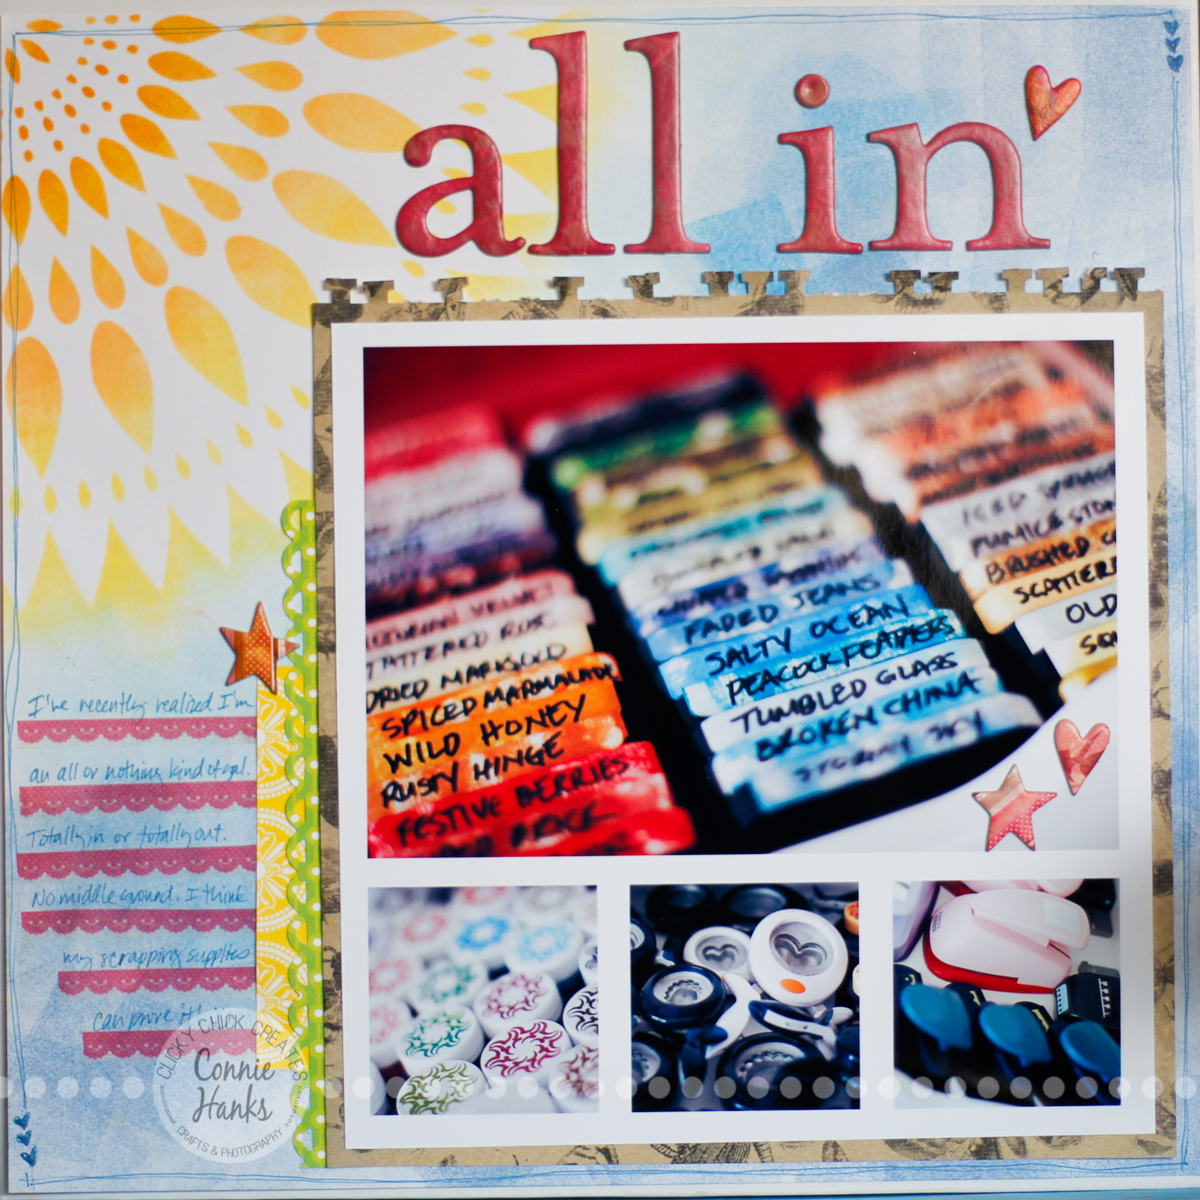 Connie Hanks Photography // ClickyChickCreates.com // All In scrapbook layout using The Crafter's Workshop Zinnia, Tim Holtz Distress Inks, Fiskar punches, embossing powder